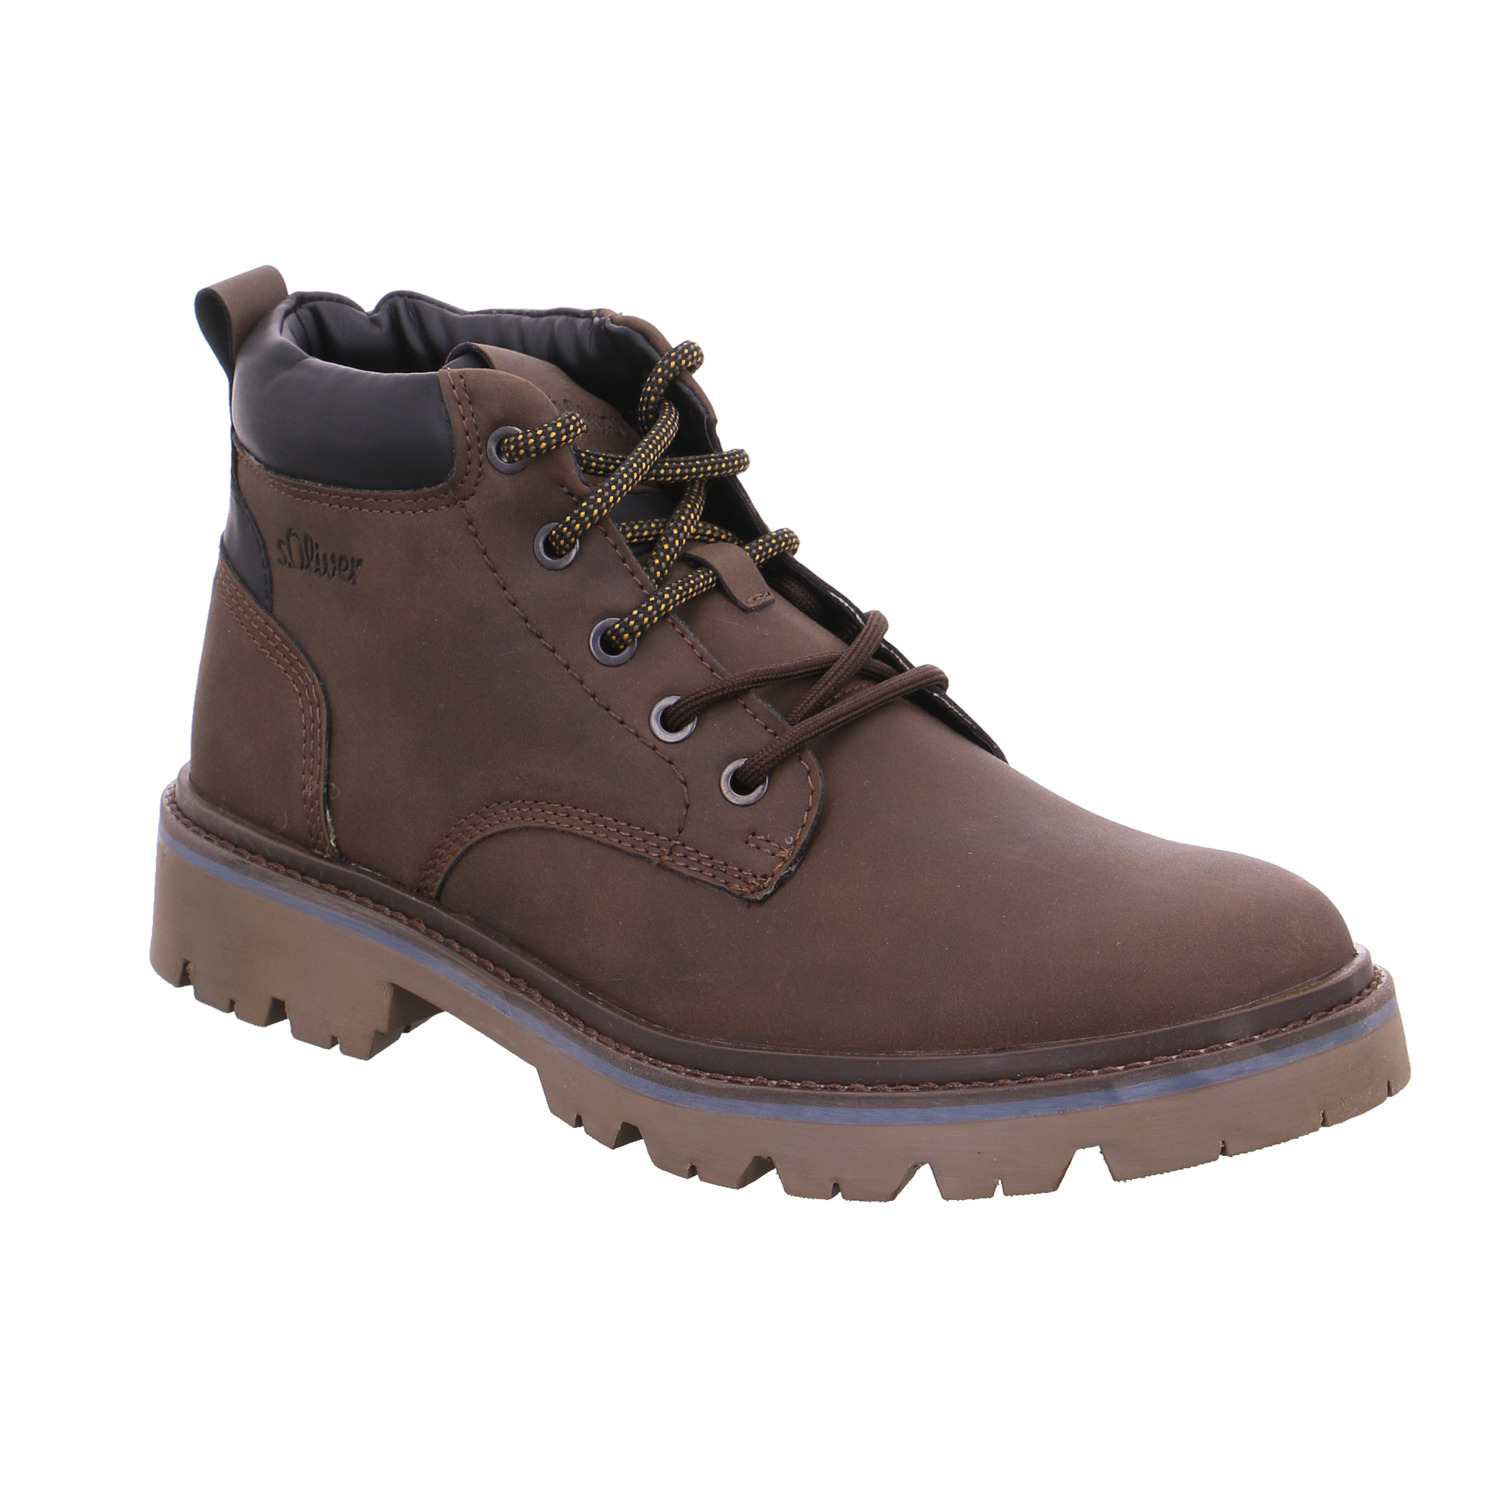 S.OLIVER Winter-Boots Braun Synthetik FN6869